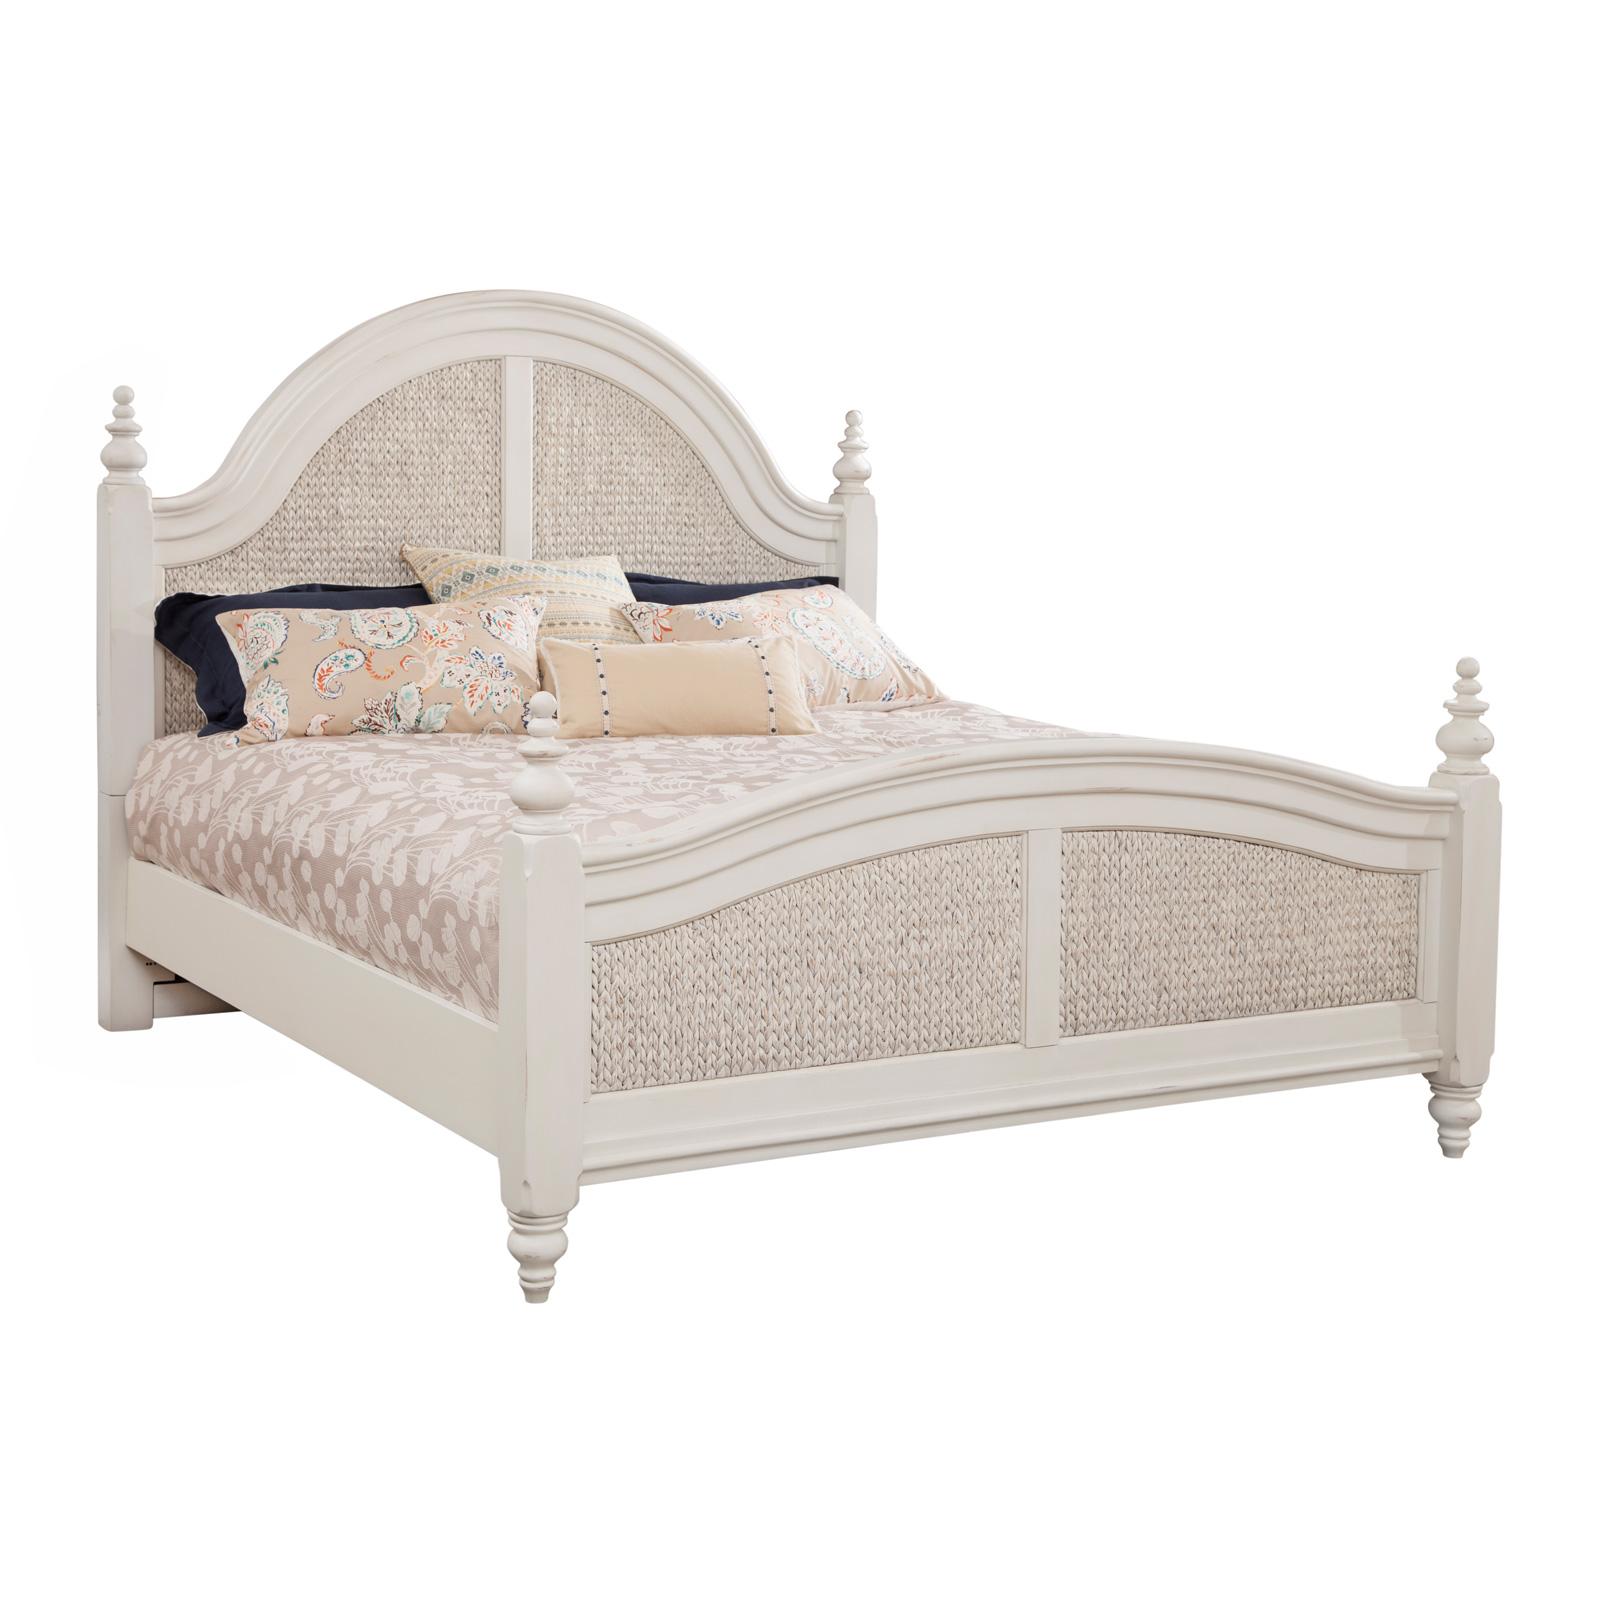 Youth, Traditional, Cottage Panel Bed Rodanthe 3910-50WOWO 3910-50WOWO in White 